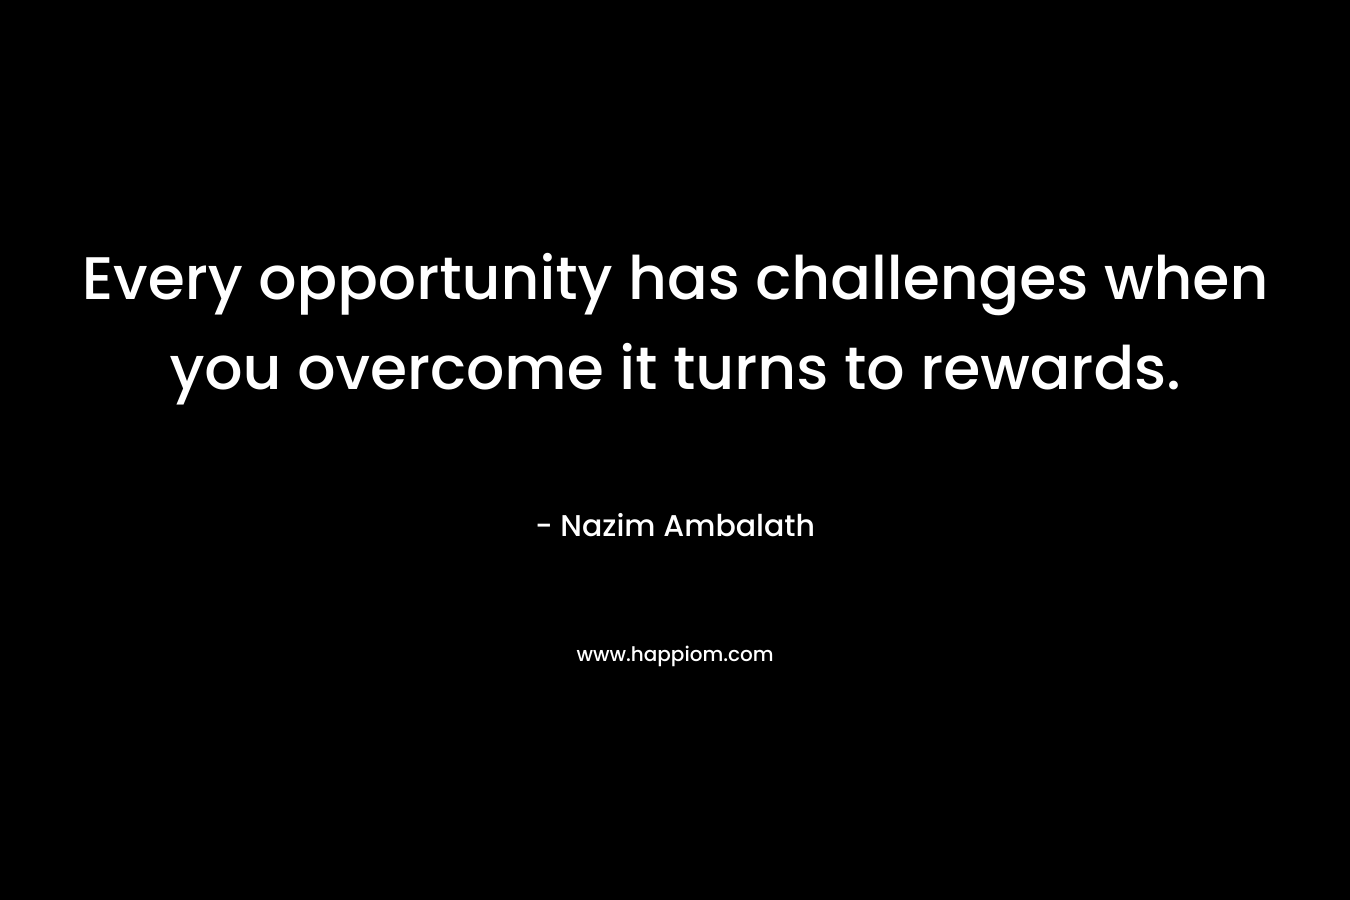 Every opportunity has challenges when you overcome it turns to rewards. – Nazim Ambalath